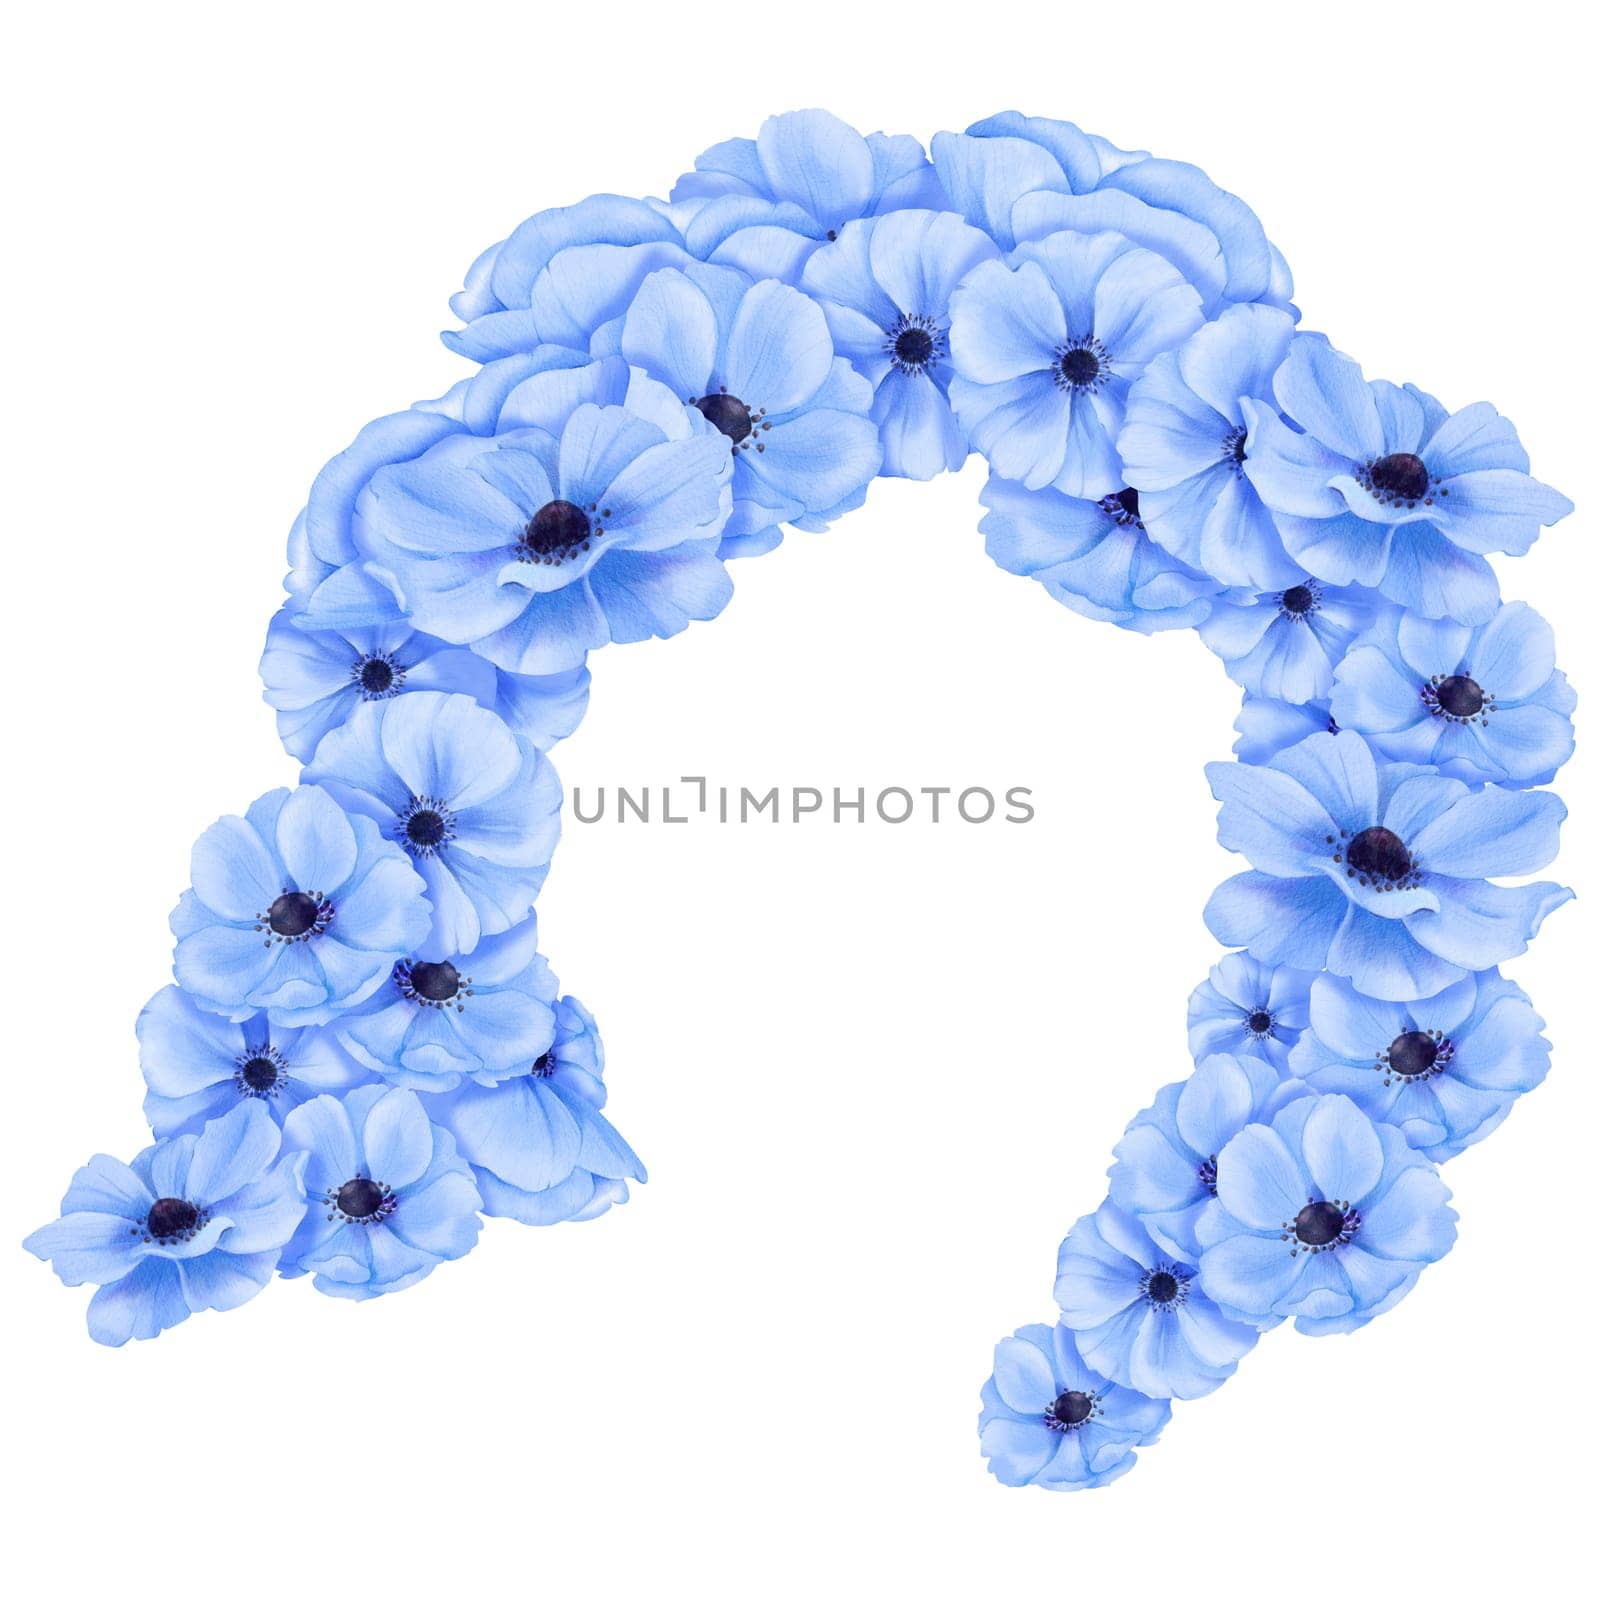 A female hairstyle adorned with blue watercolor anemones. design is for use in beauty salons, fashion magazines, hair care products, and promotional materials targeting women's styling and fashion.